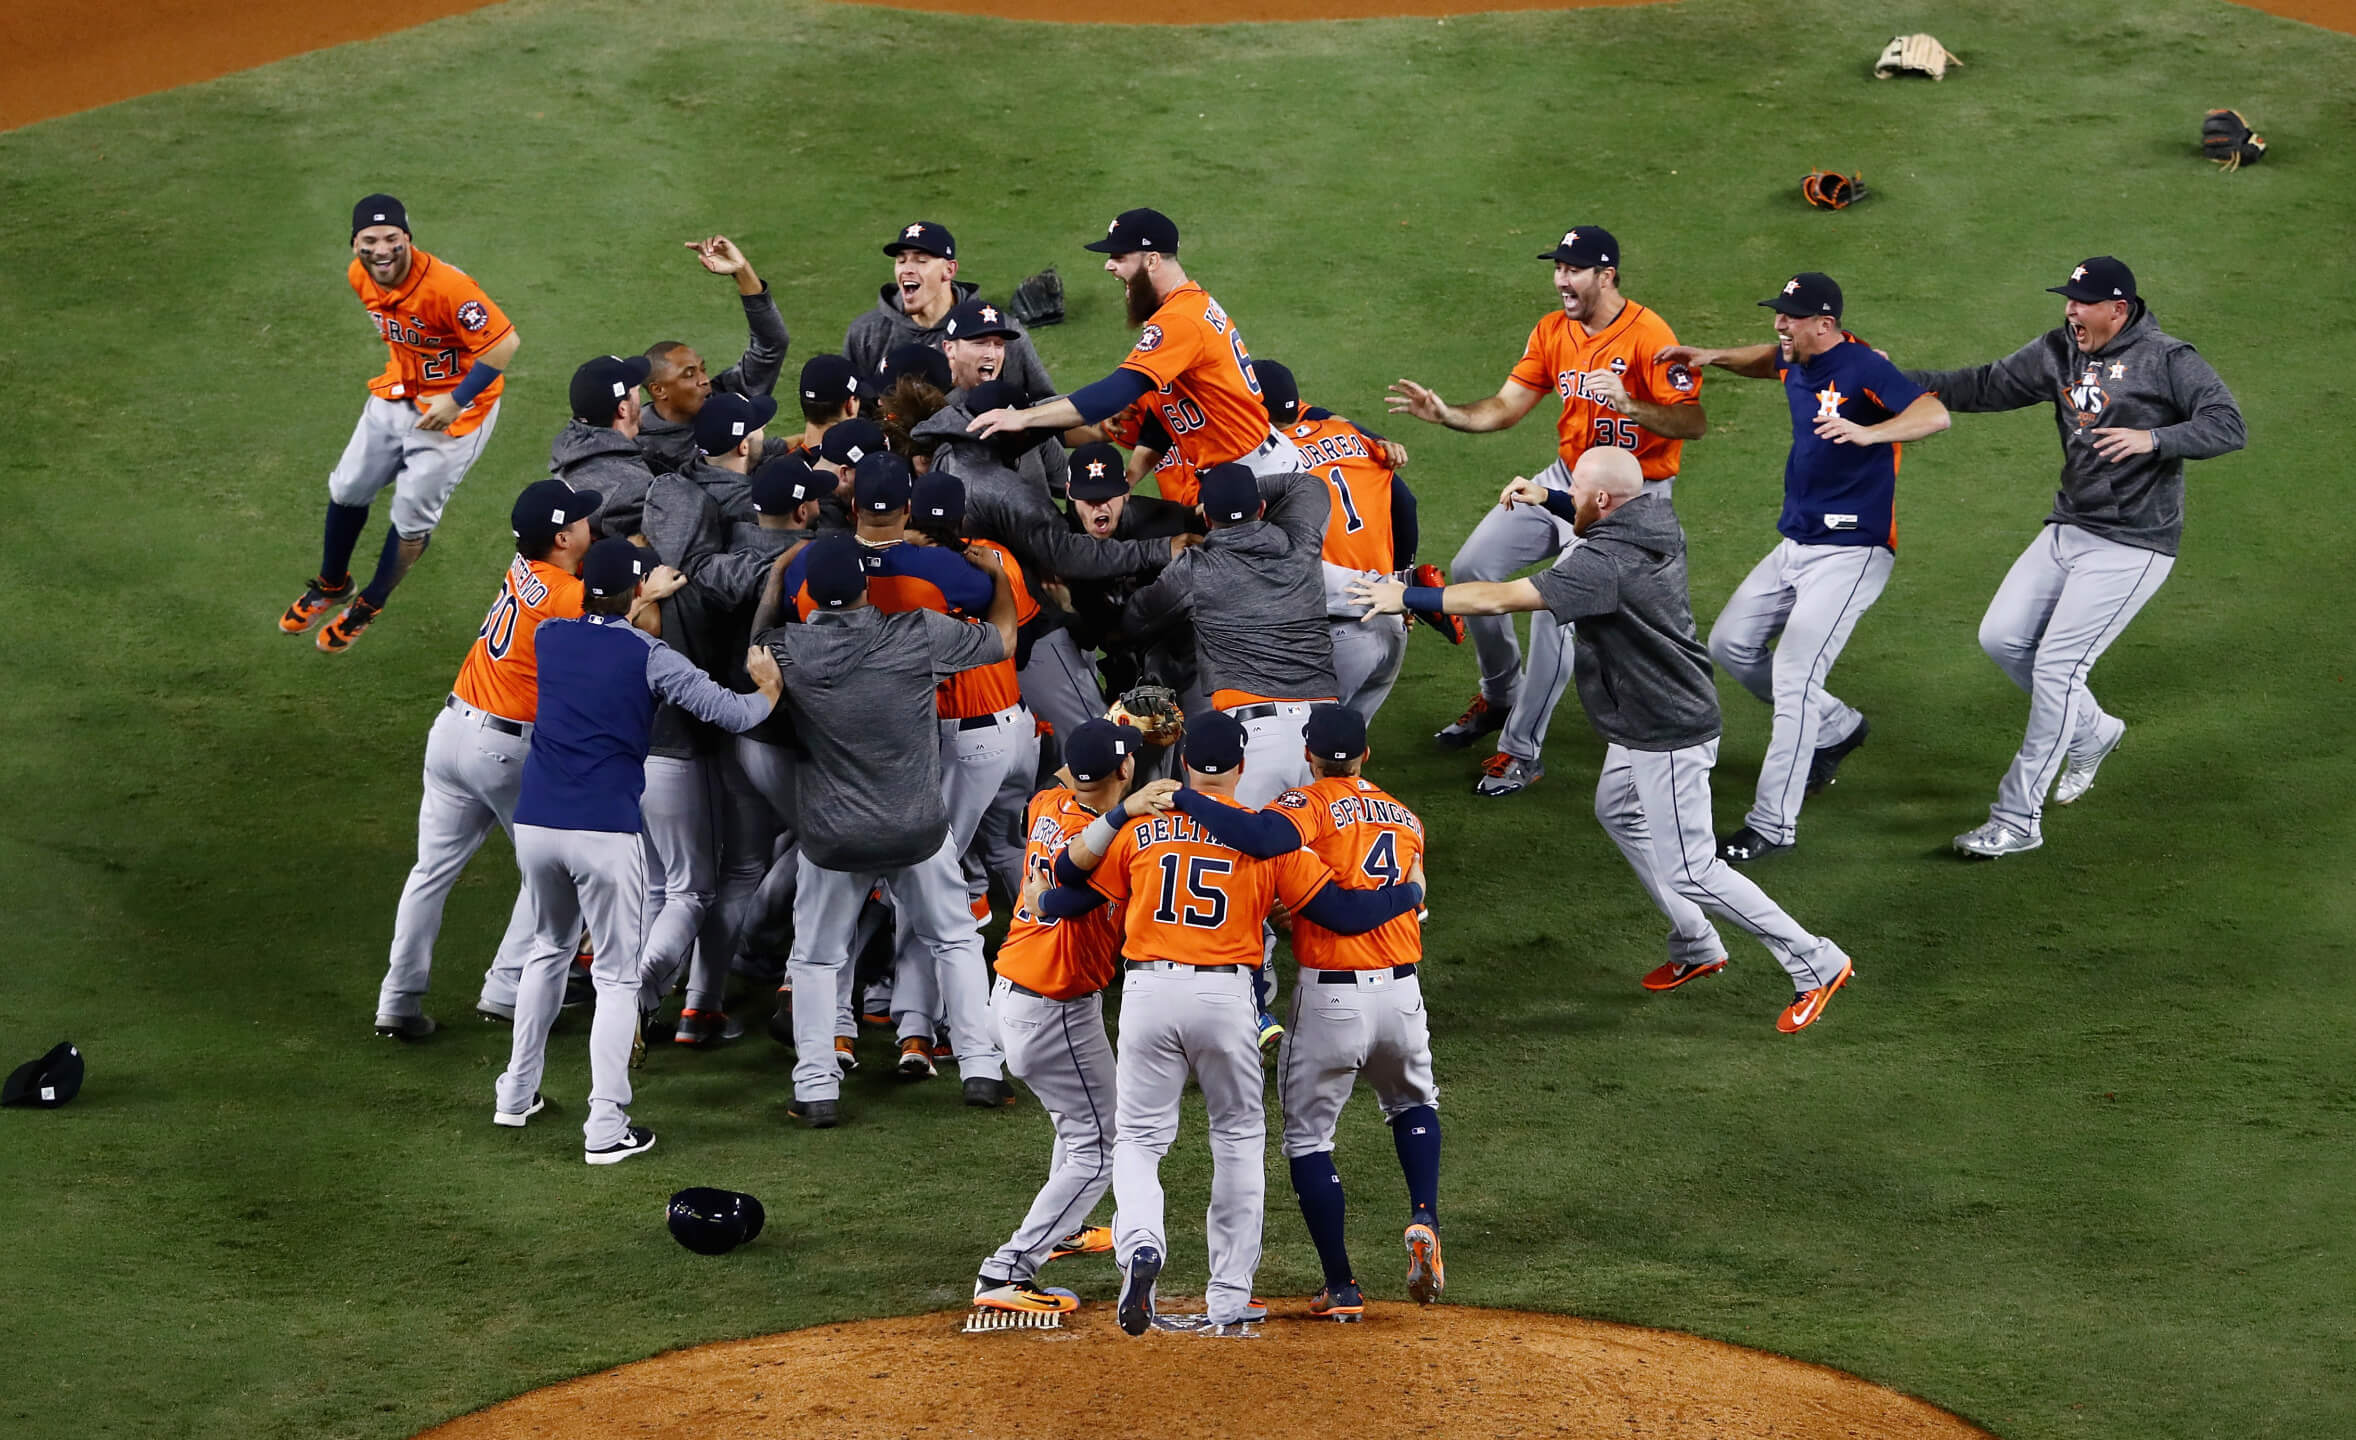 Houston Astros Fighting for 2020 World Series Title